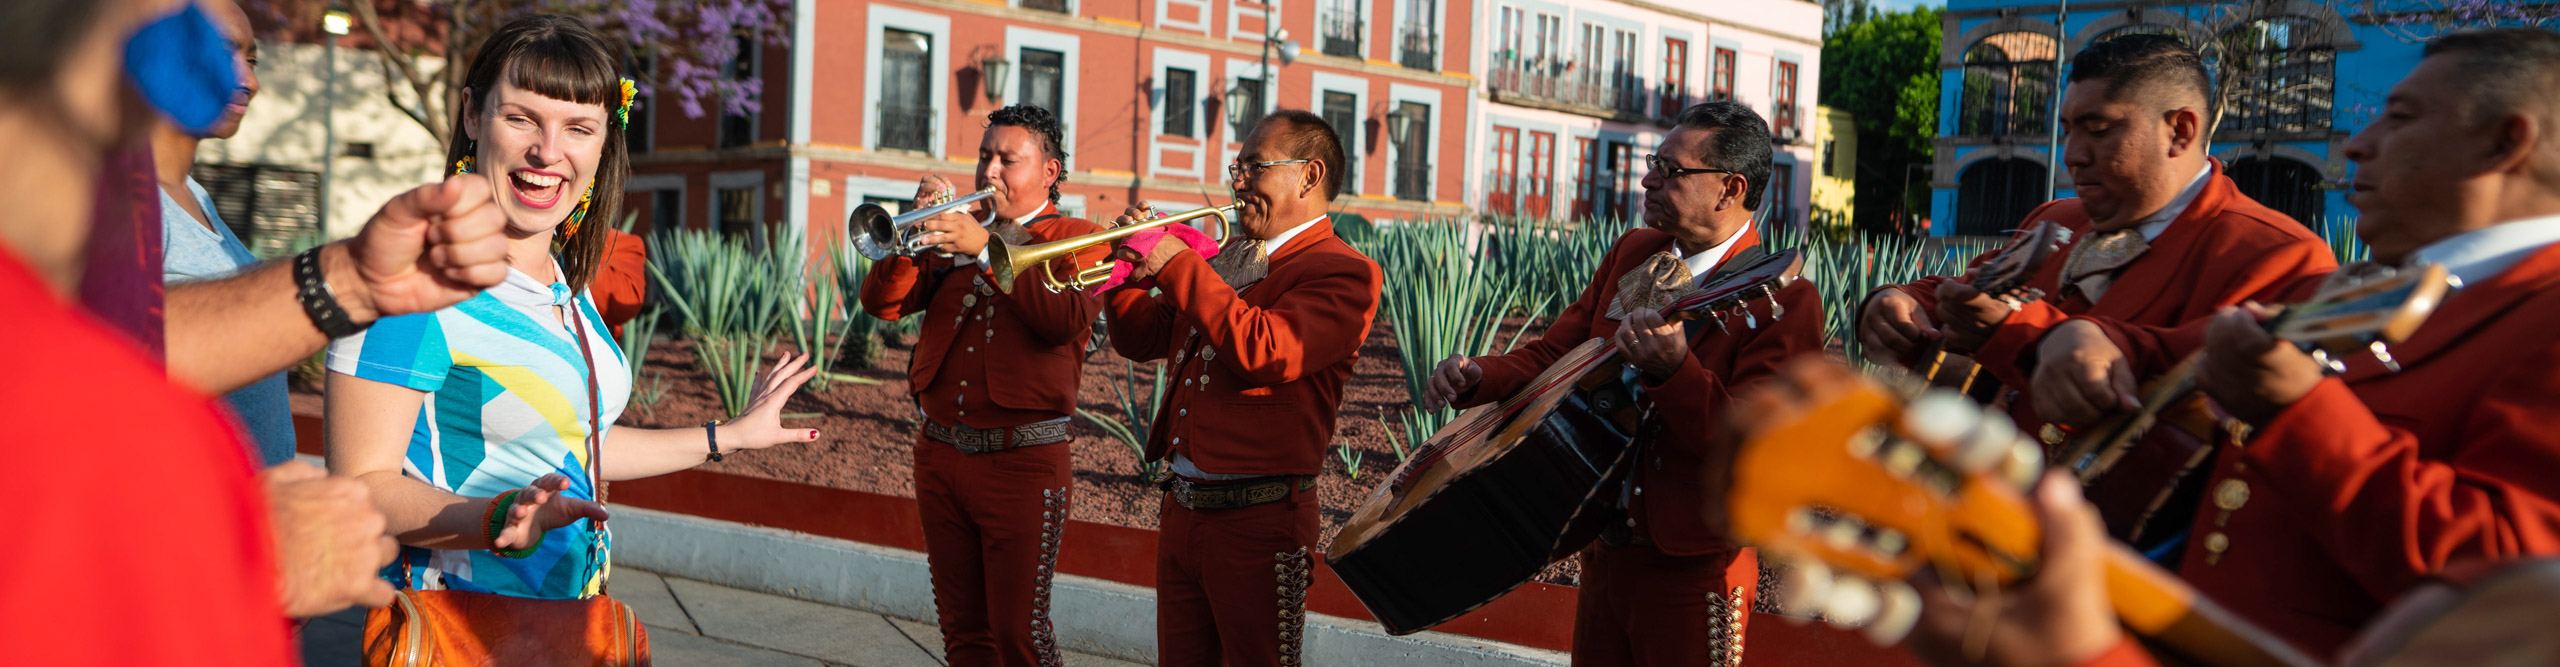 Marachi band playing on the street in Mexico 